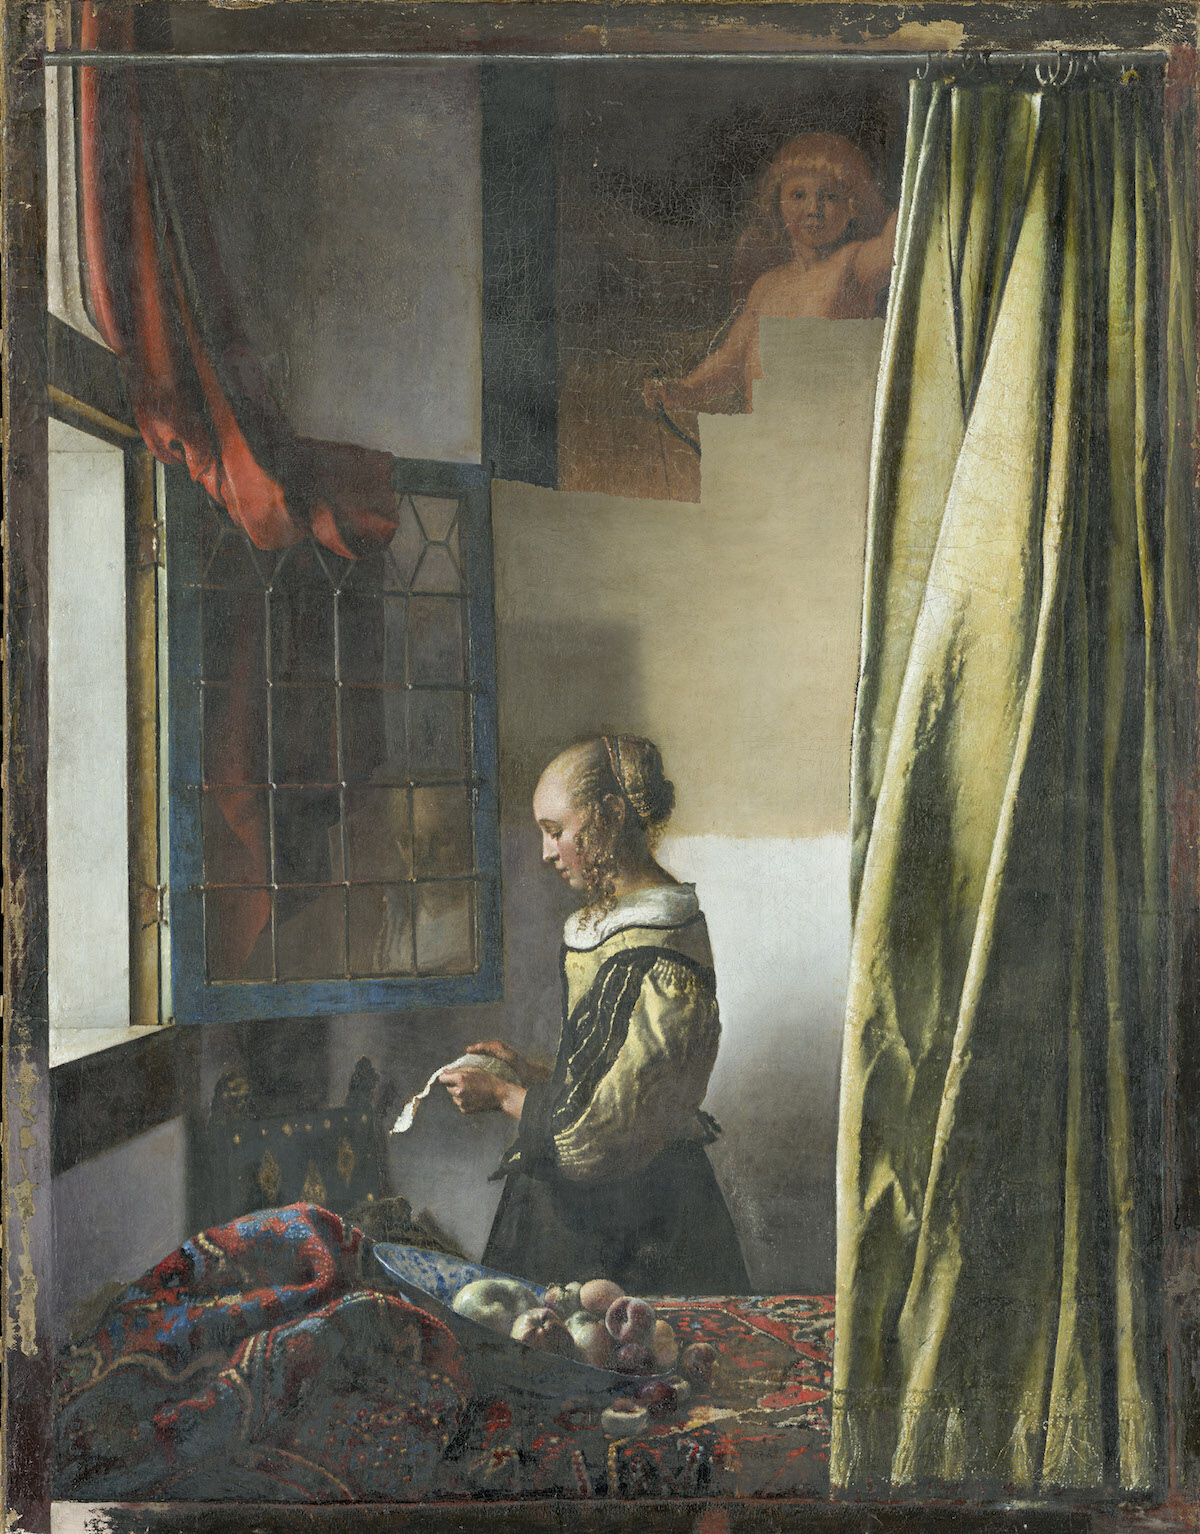 Vermeer, Girl Reading a Letter at an Open Window, 1657–59, after partial restoration. Gemäldegalerie Alte Meister. © SKD. Photo by Wolfgang Kreische.